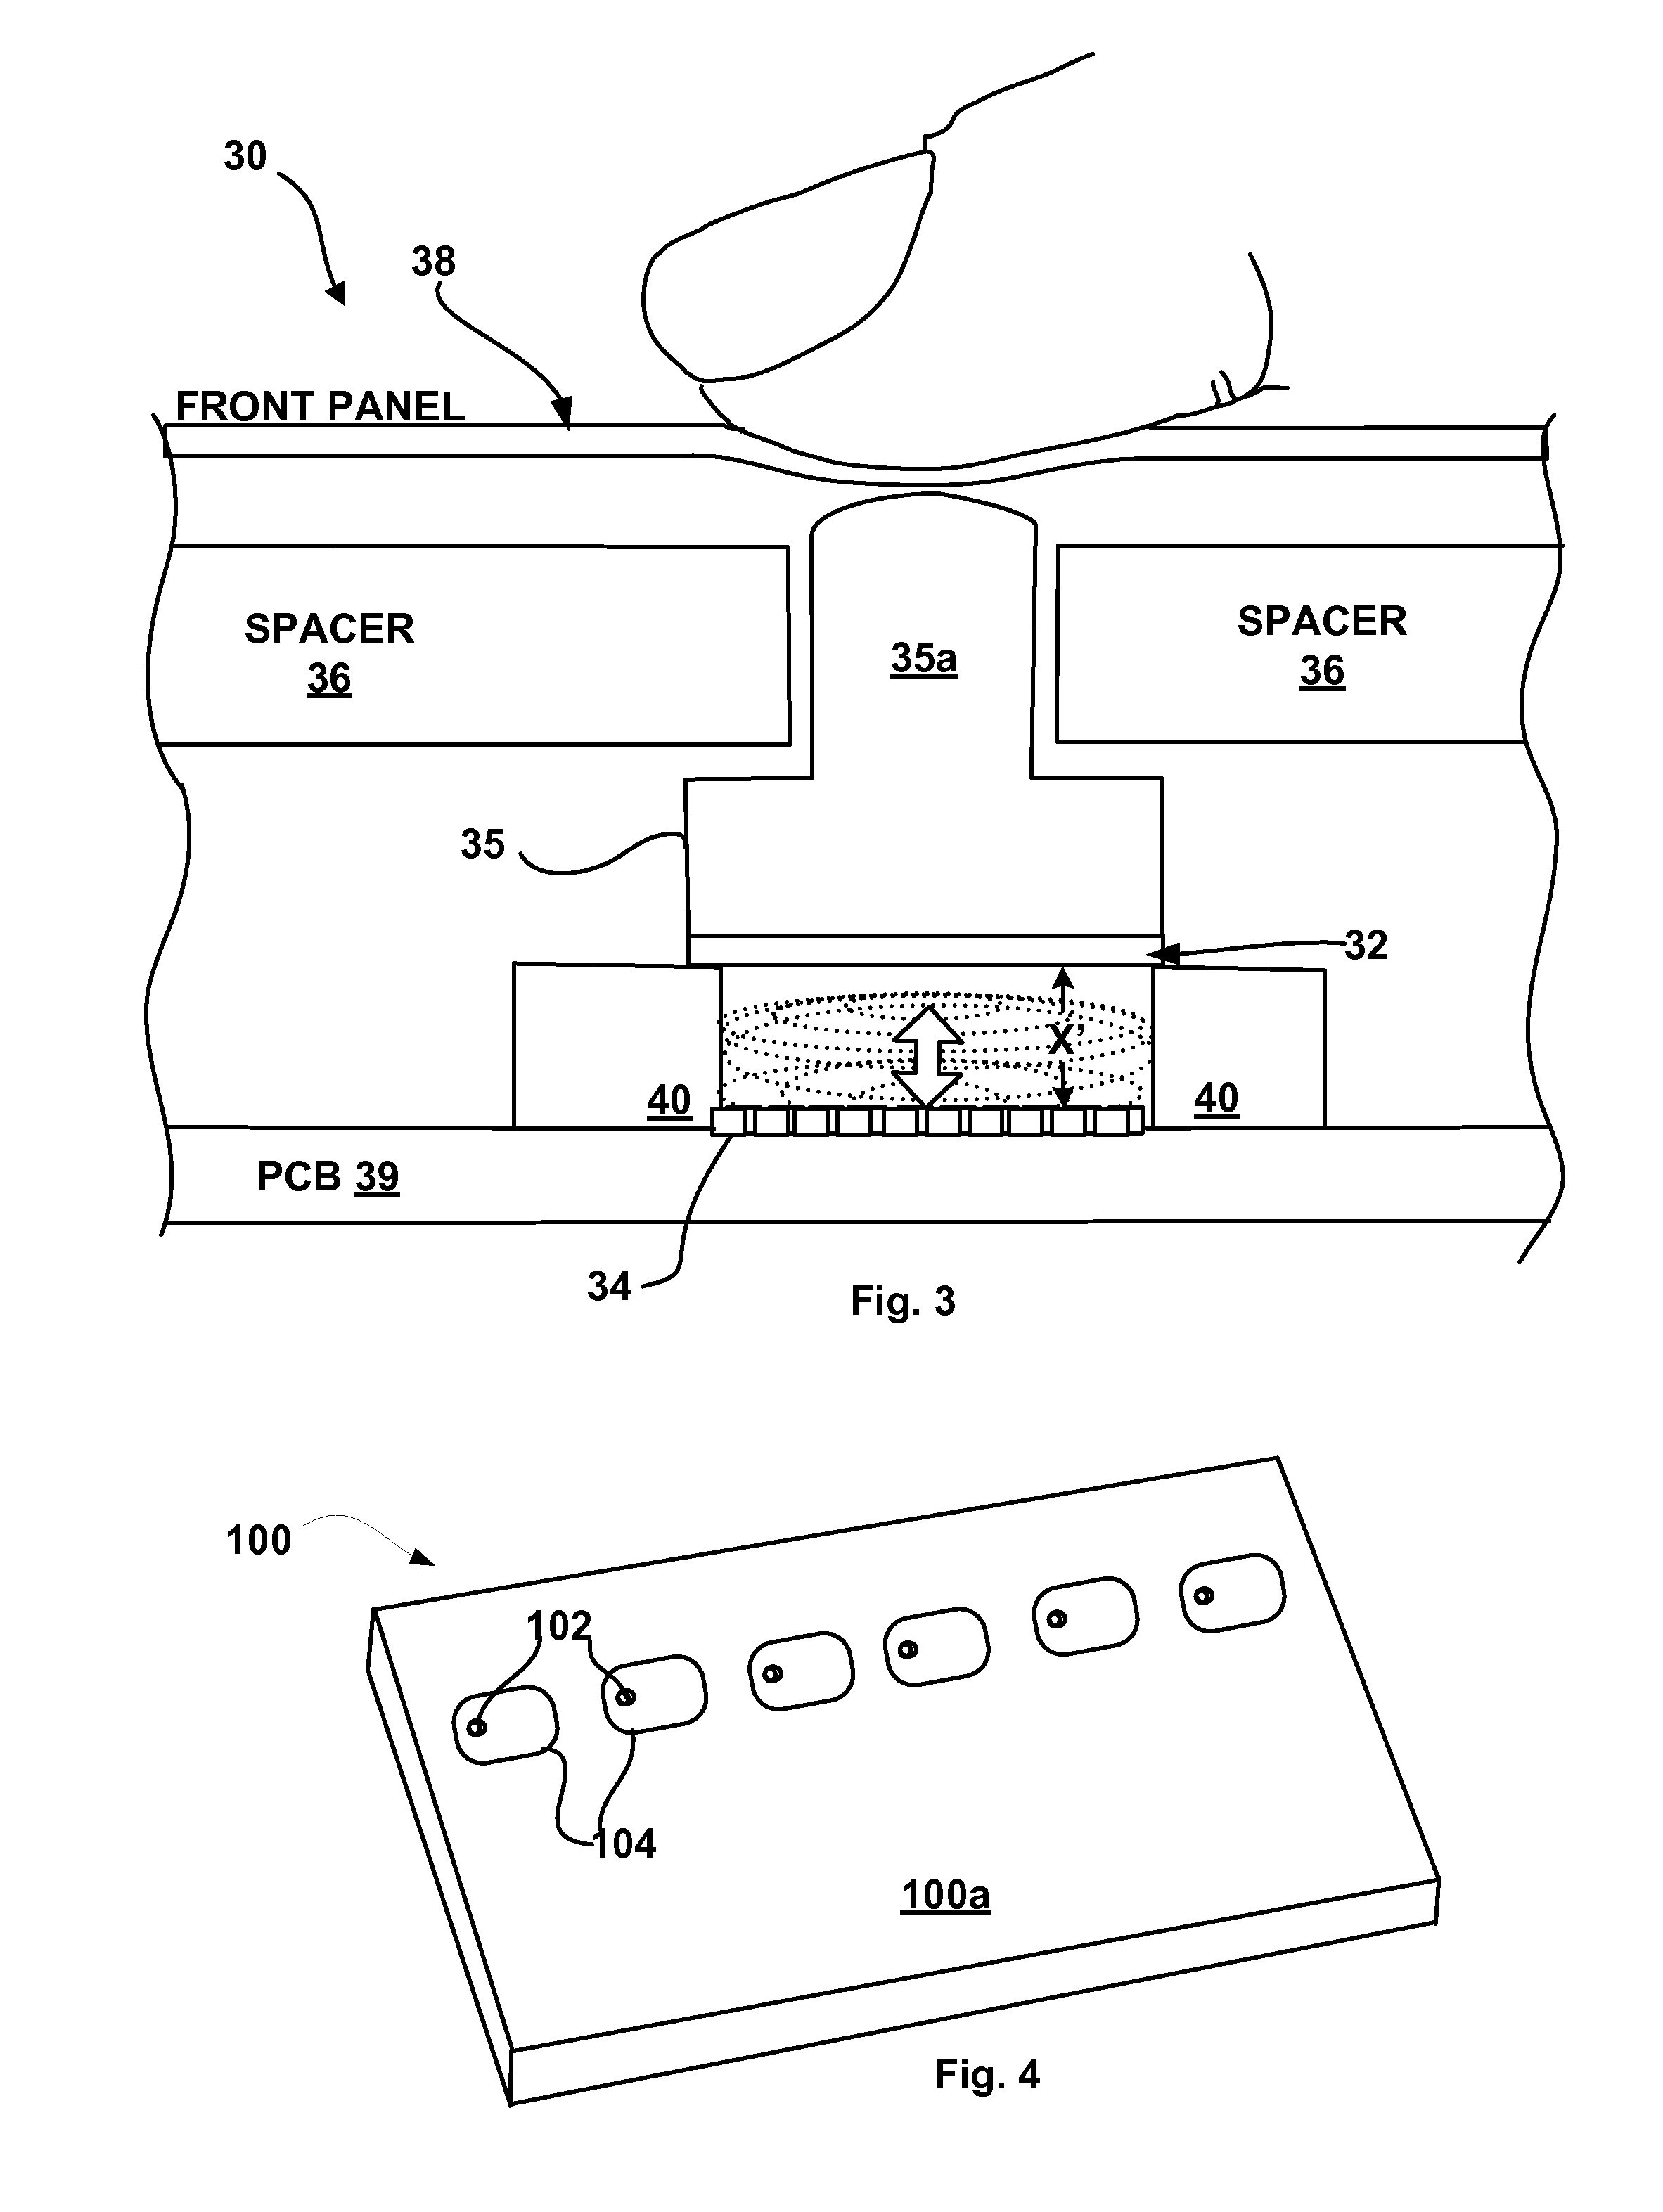 Inductive touch key switch system including a deflection translation mechanism